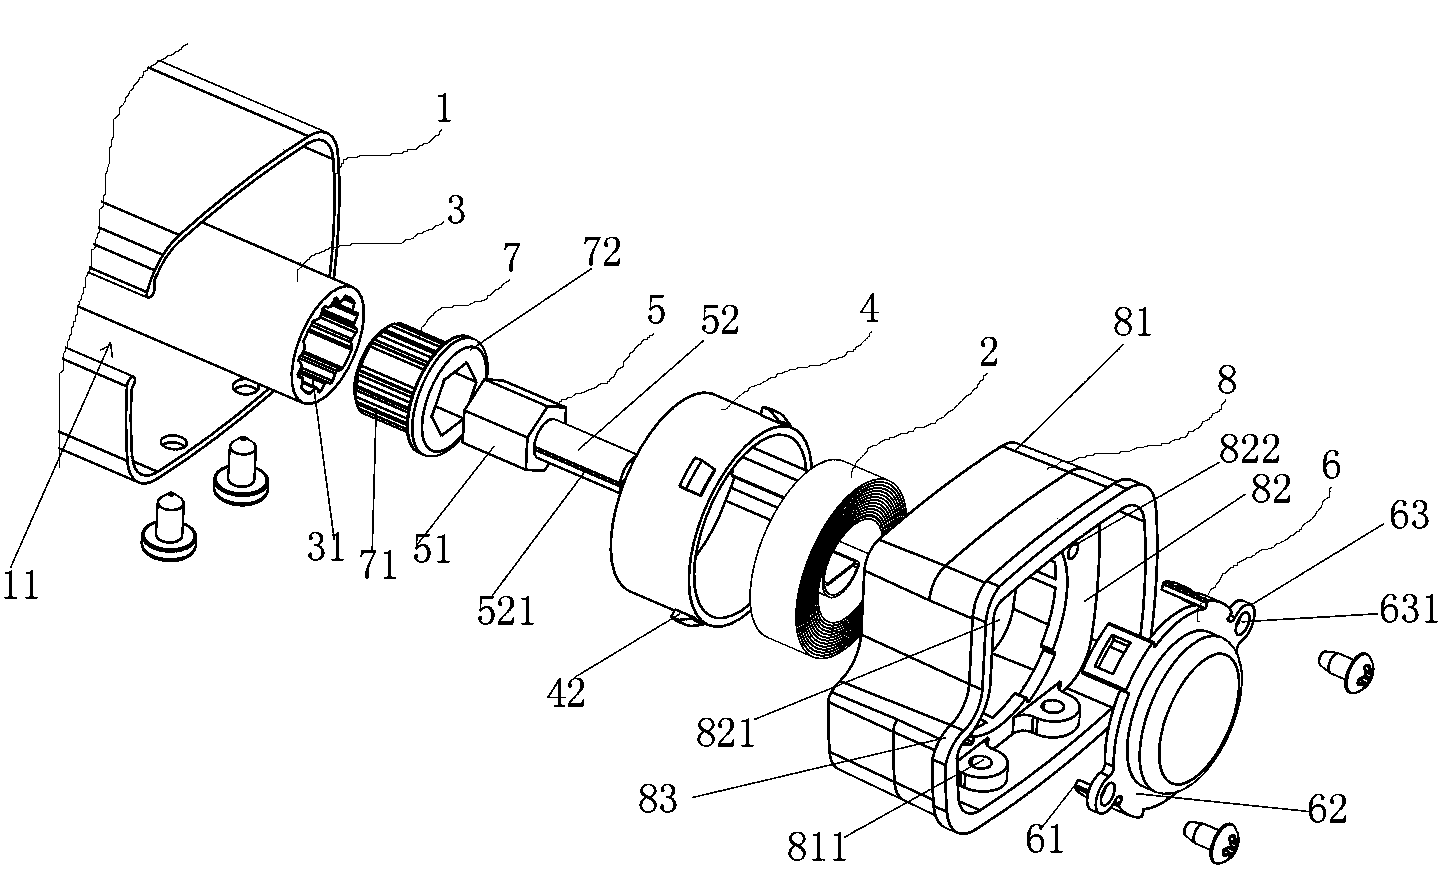 Furling mechanism for covering curtain